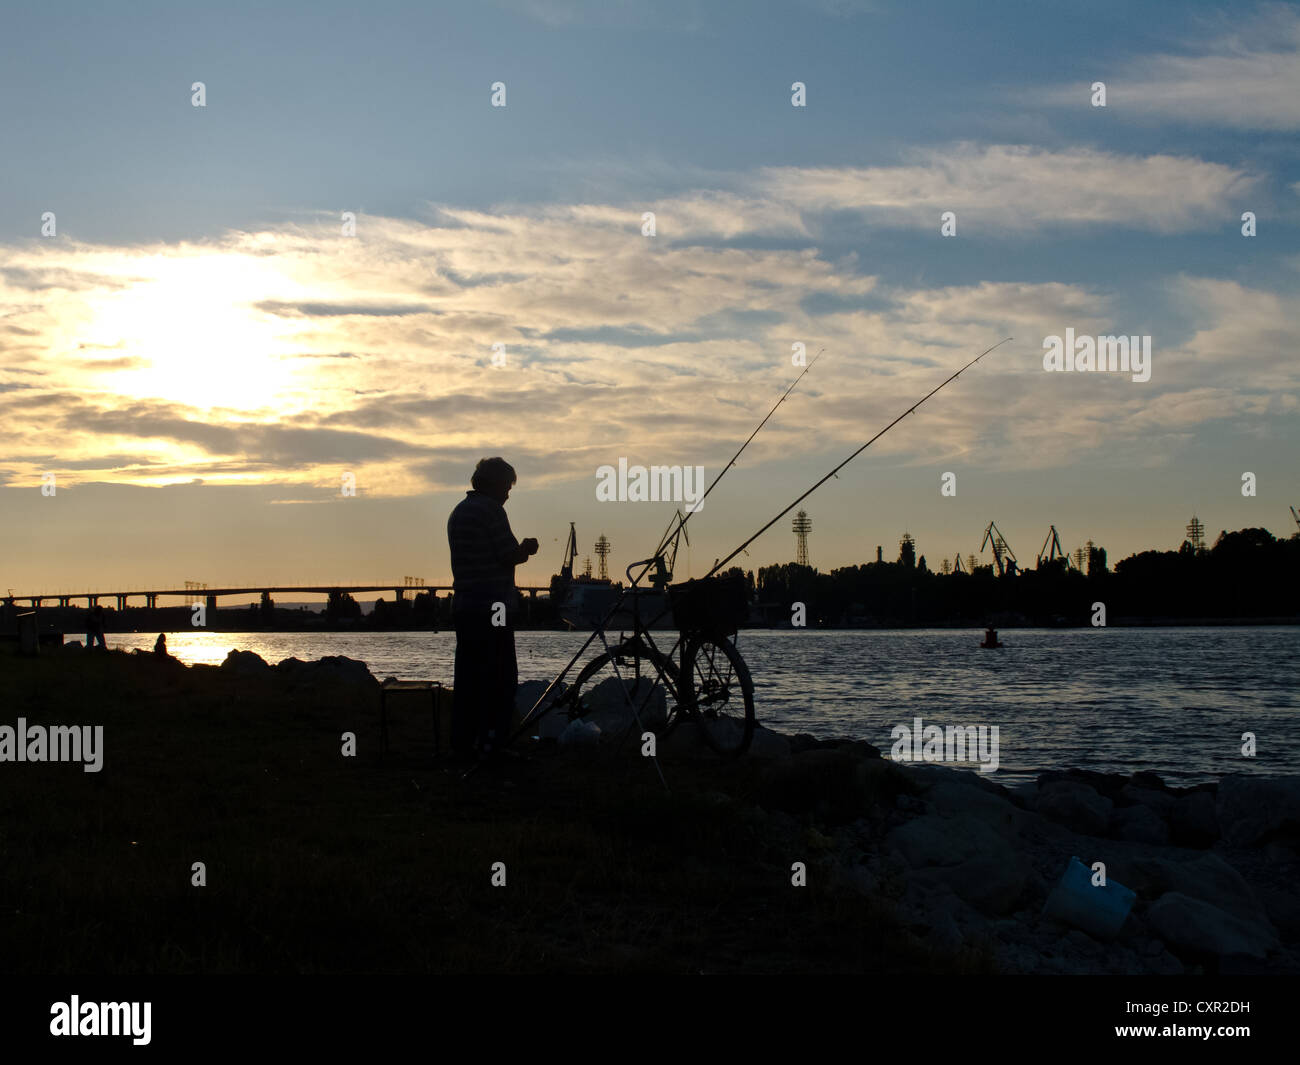 Take a look at our - varna-fishing.com (Sunline Bulgaria)